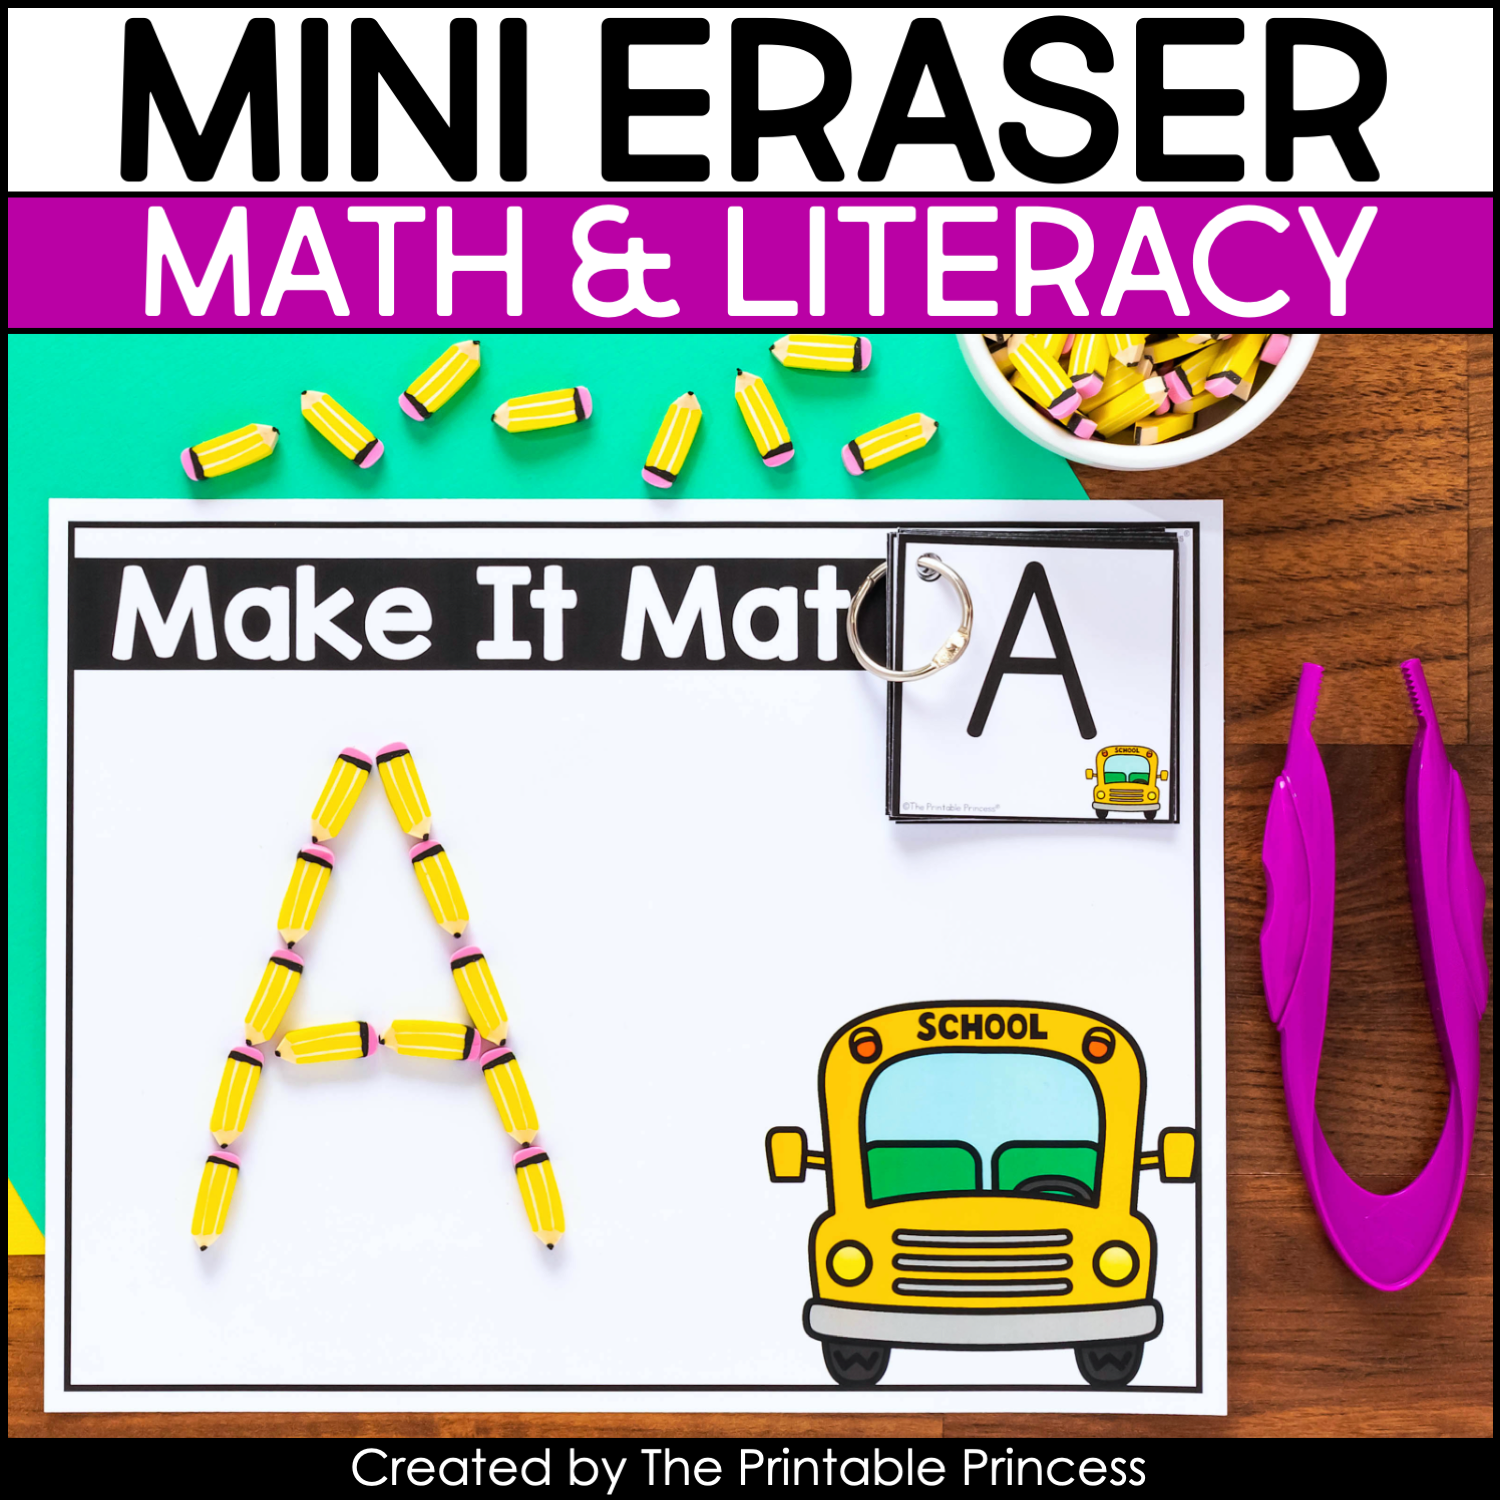 Make It Mats Using Mini Erasers, Letters and Numbers